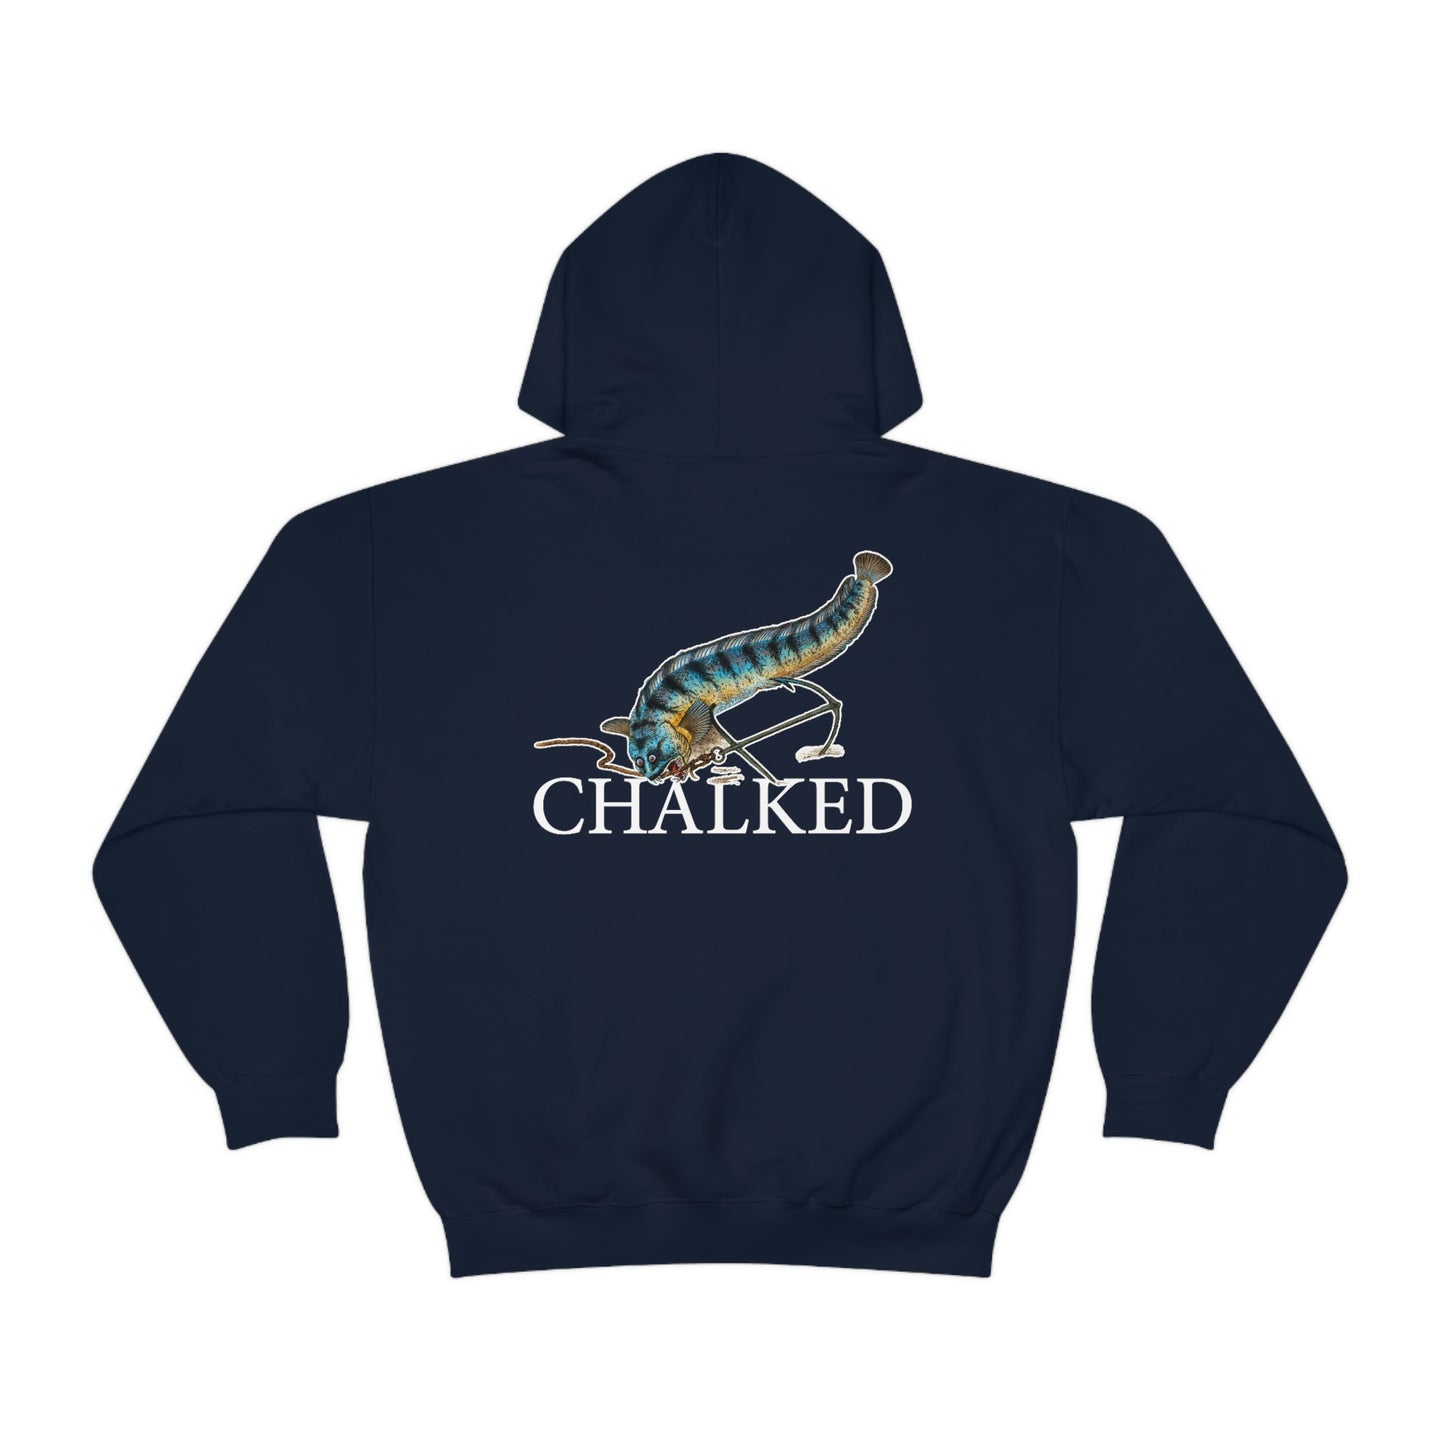 Chalked - Hooded Edition